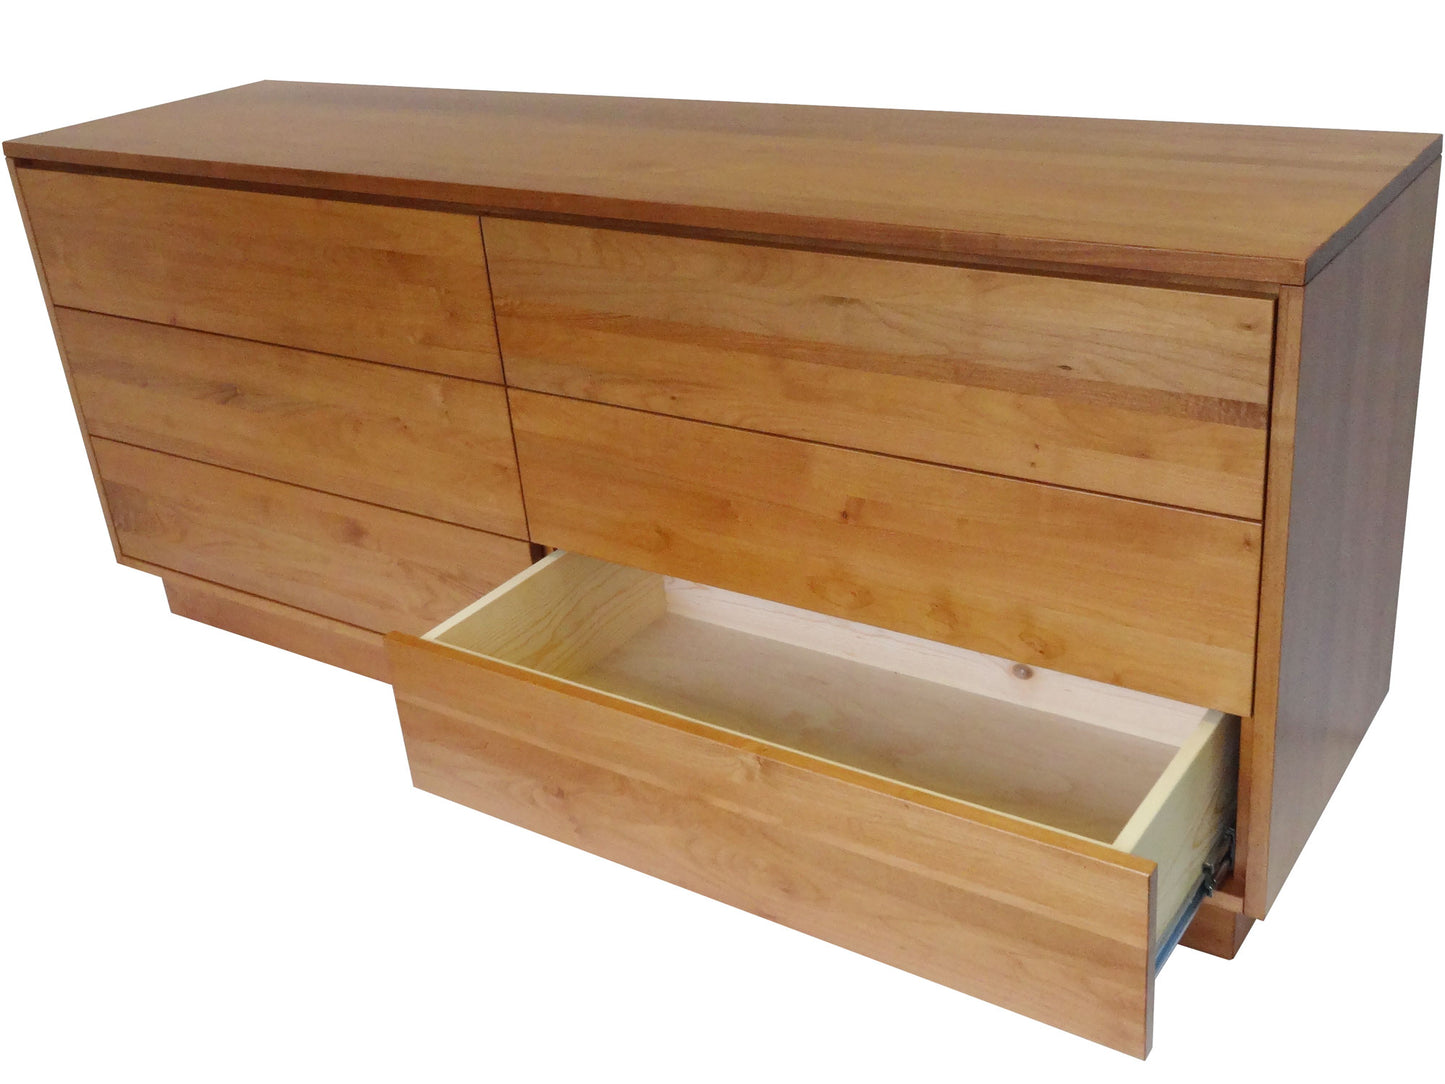 Muse LA Dresser - open solid wood drawer view